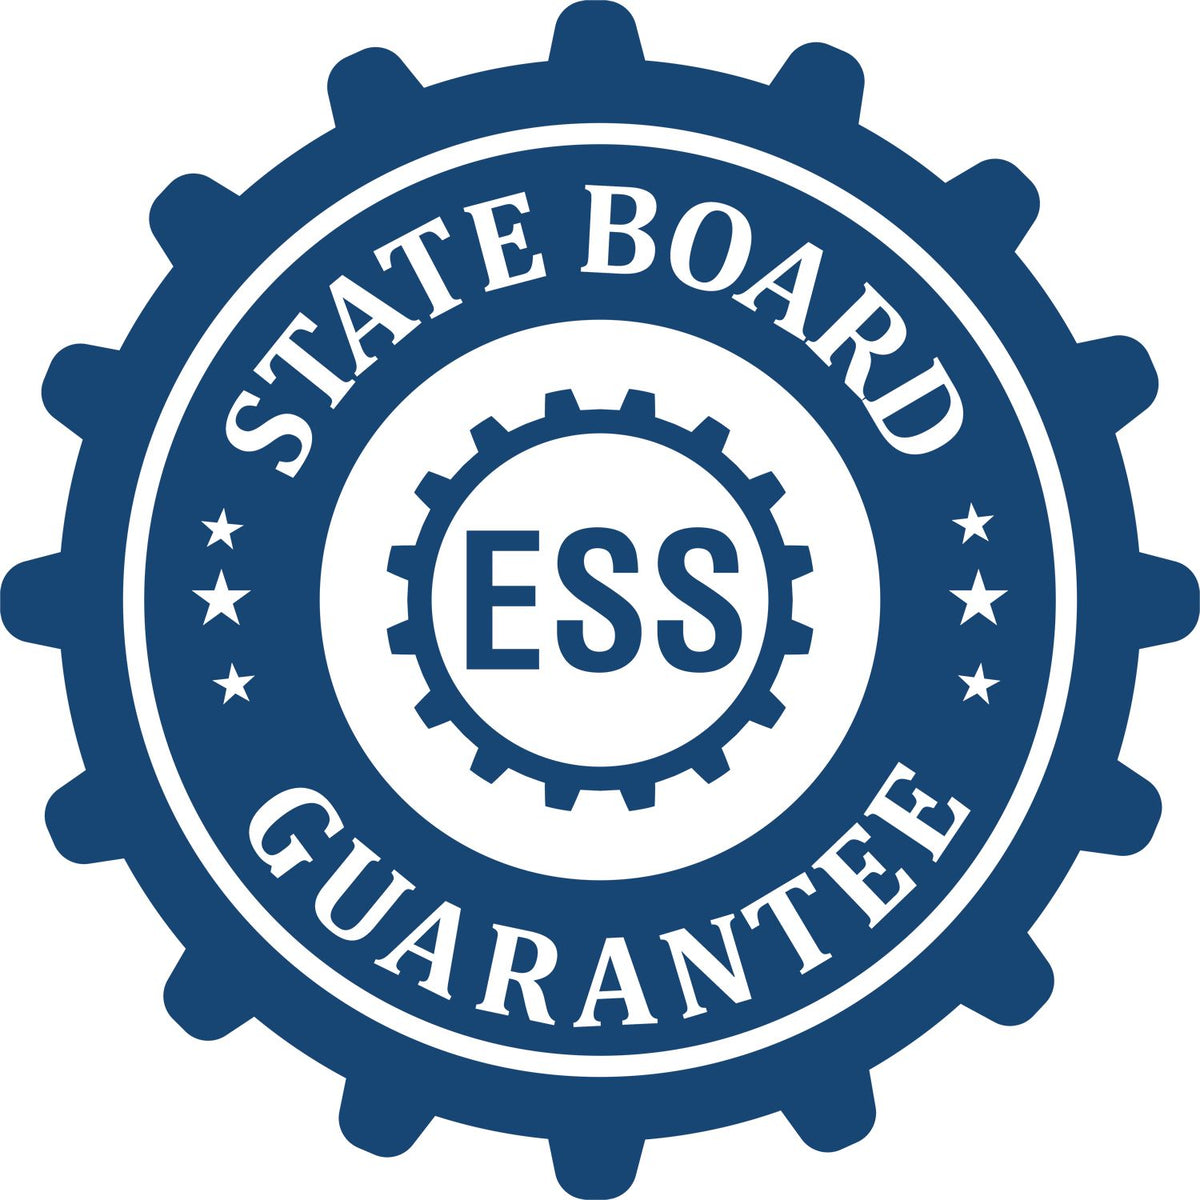 An emblem in a gear shape illustrating a state board guarantee for the Hybrid Vermont Geologist Seal